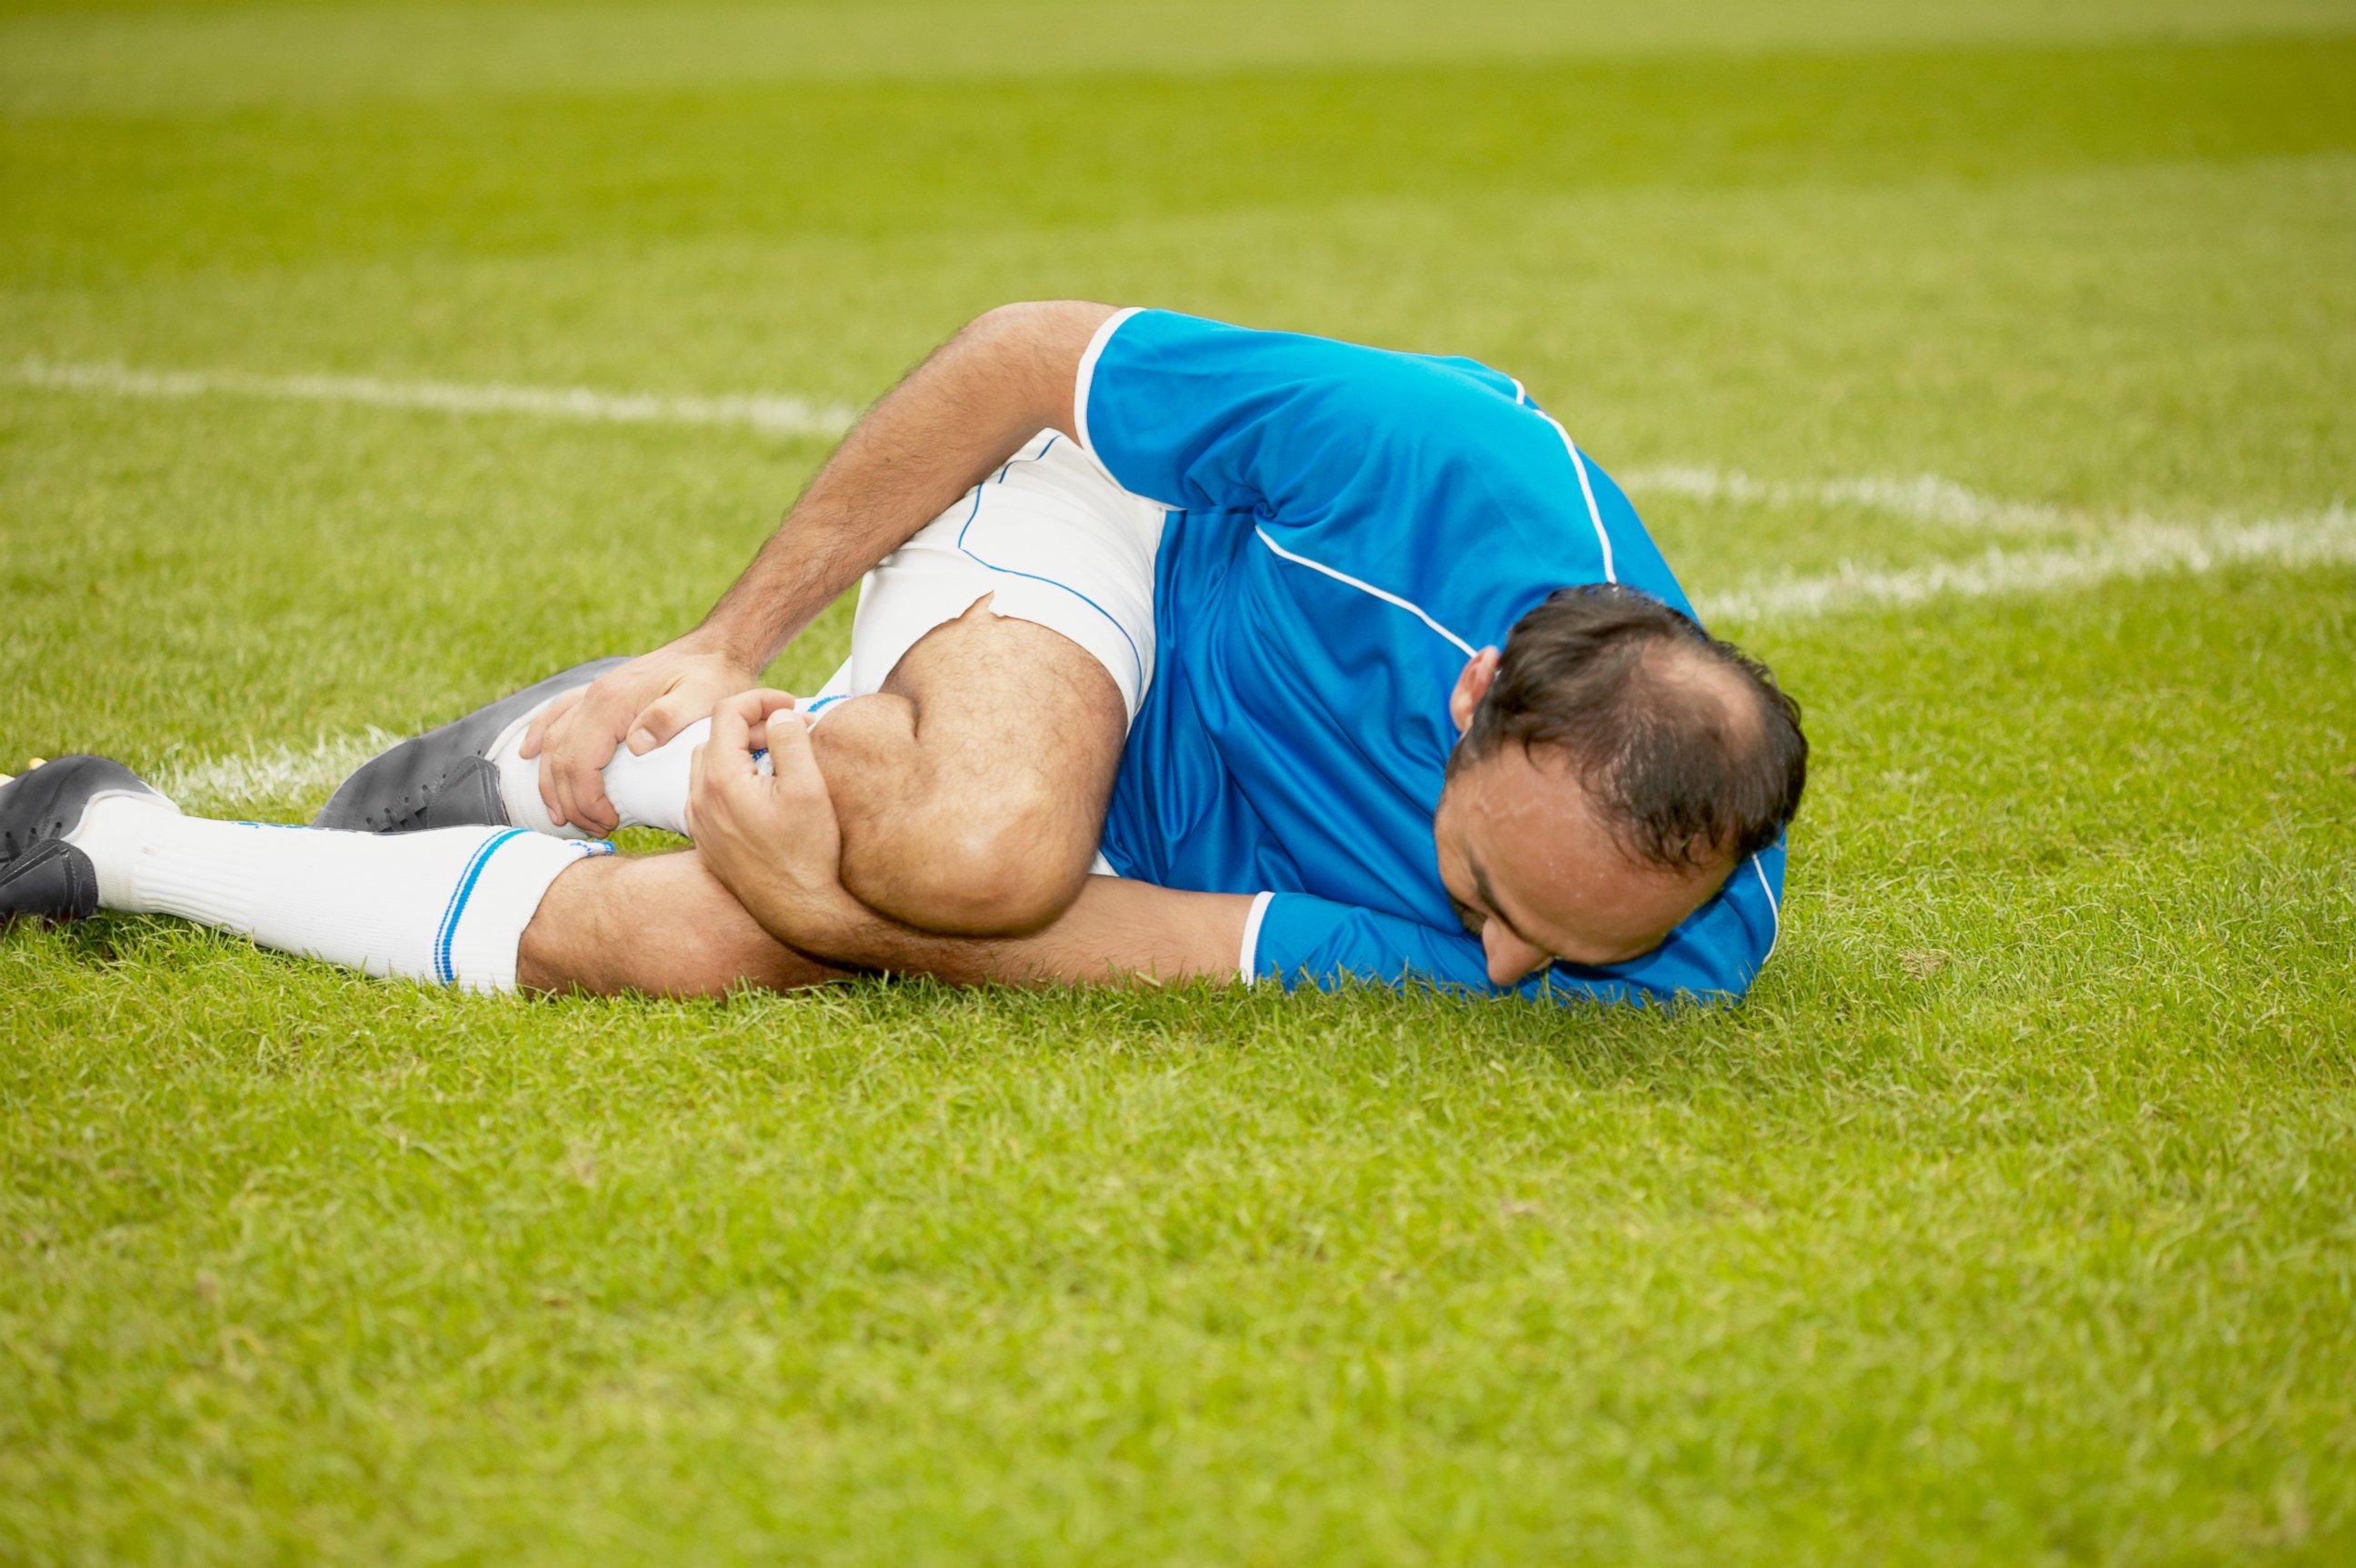 PHOTO: An injured soccer player is seen in this undated stock photo. 